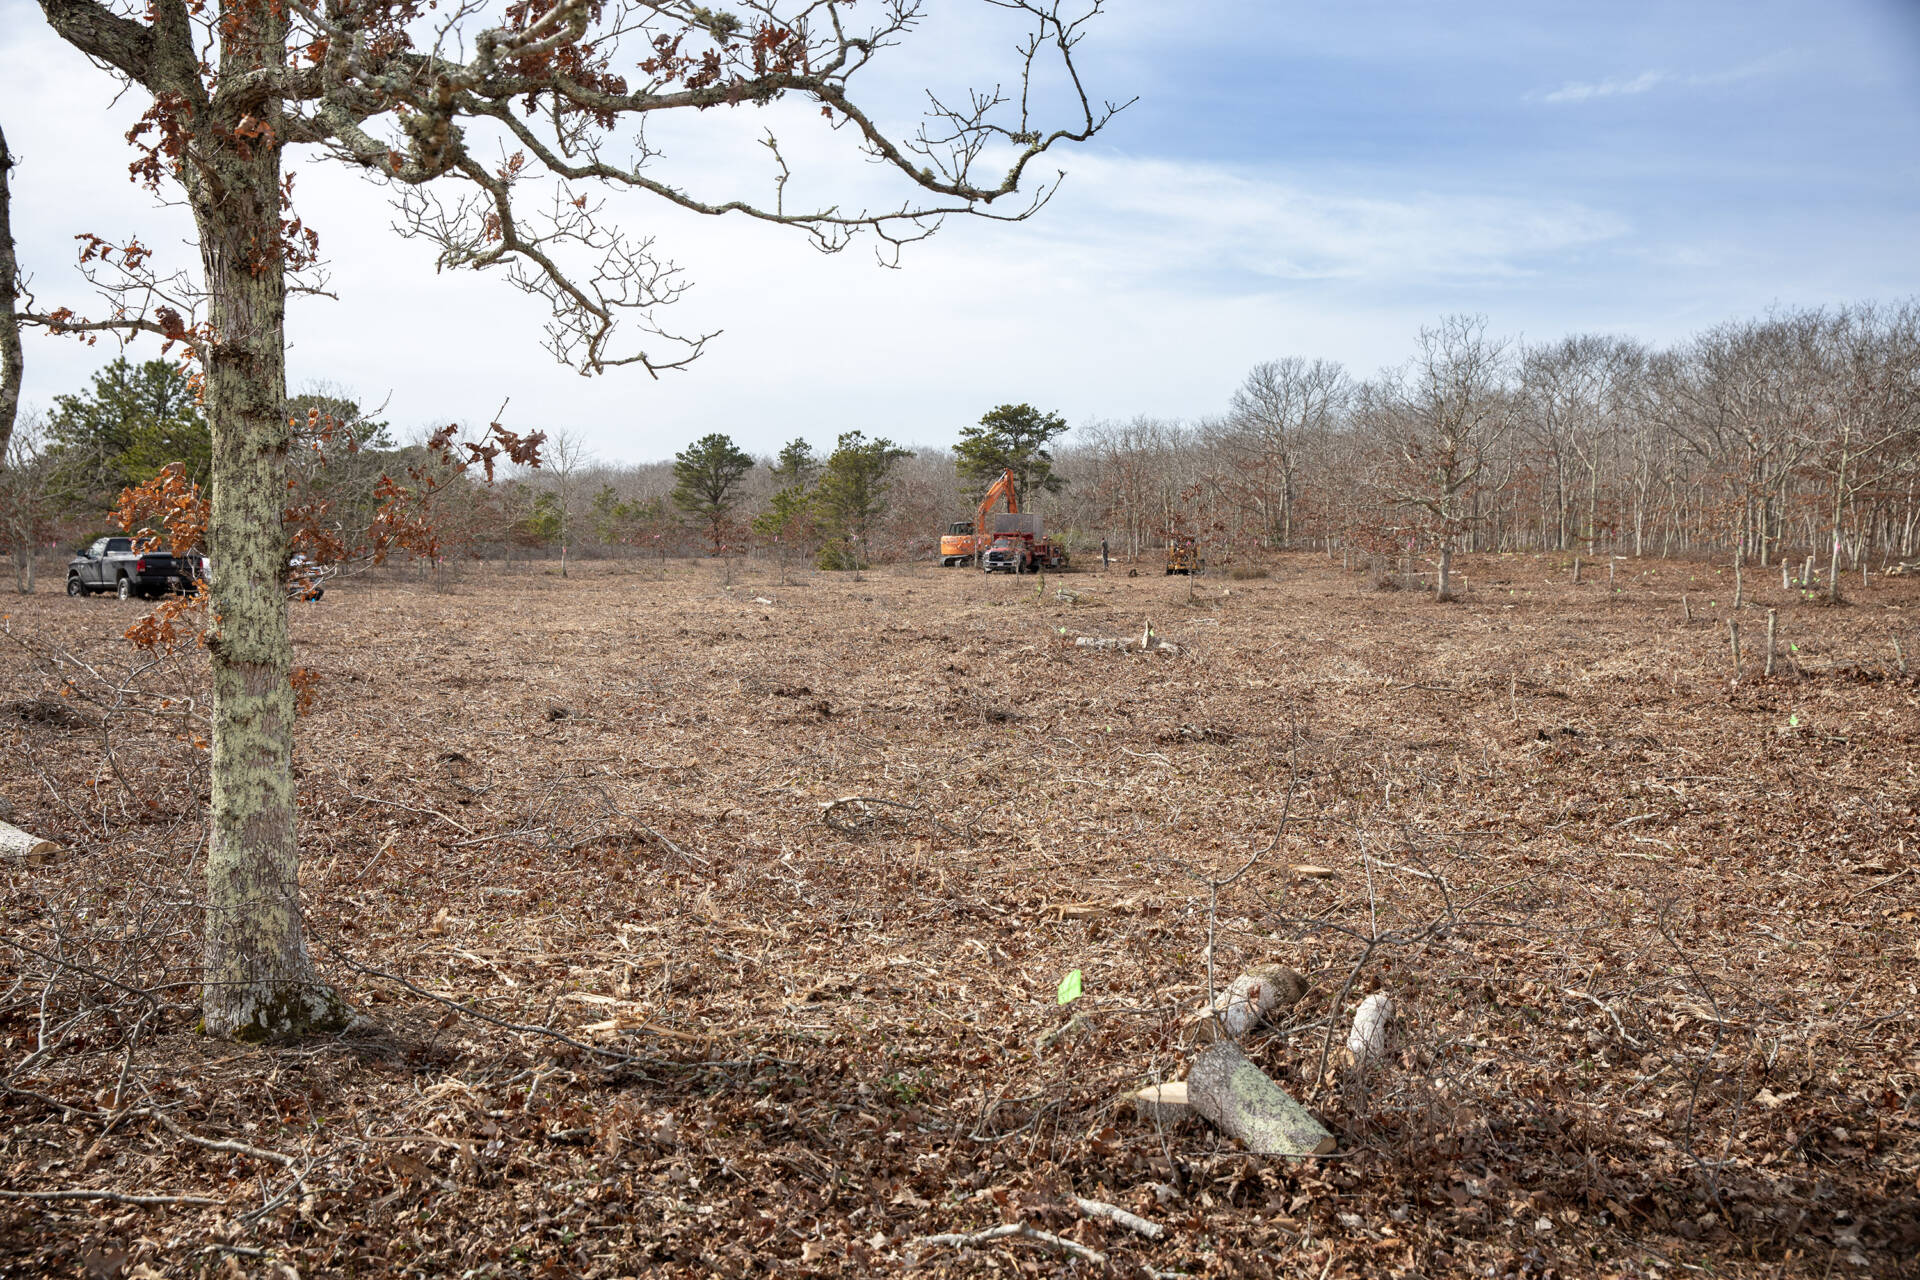 A crew clears unmanaged woodland as part of The Nature Conservancy's project to restore the 